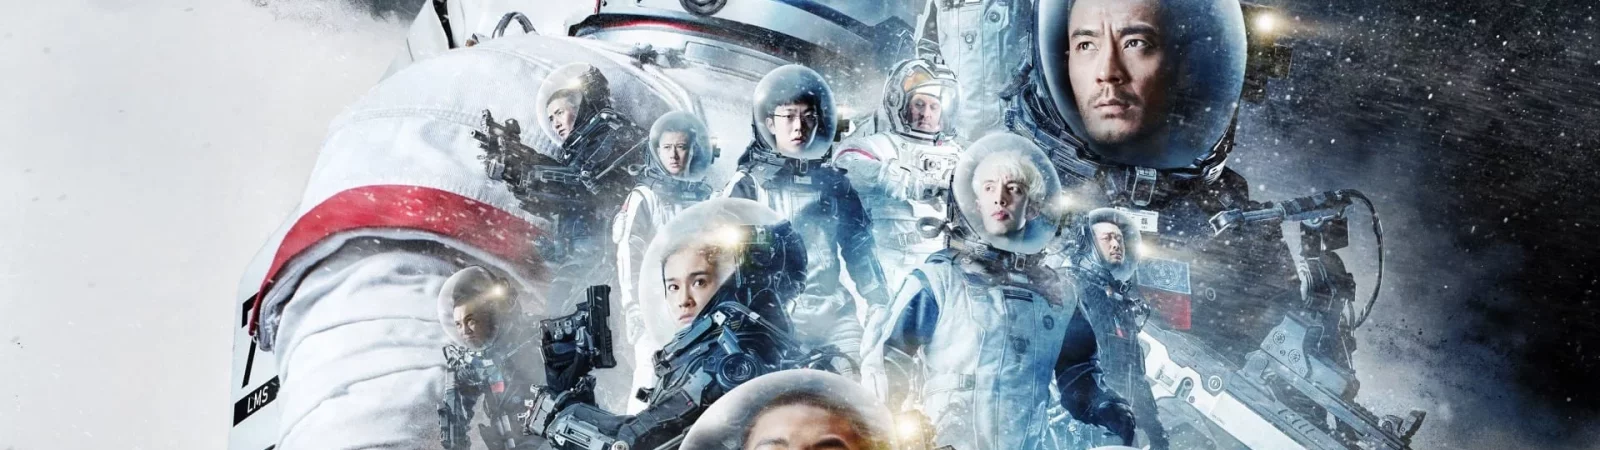 Photo du film : The Wandering Earth, Special Edition Beyound